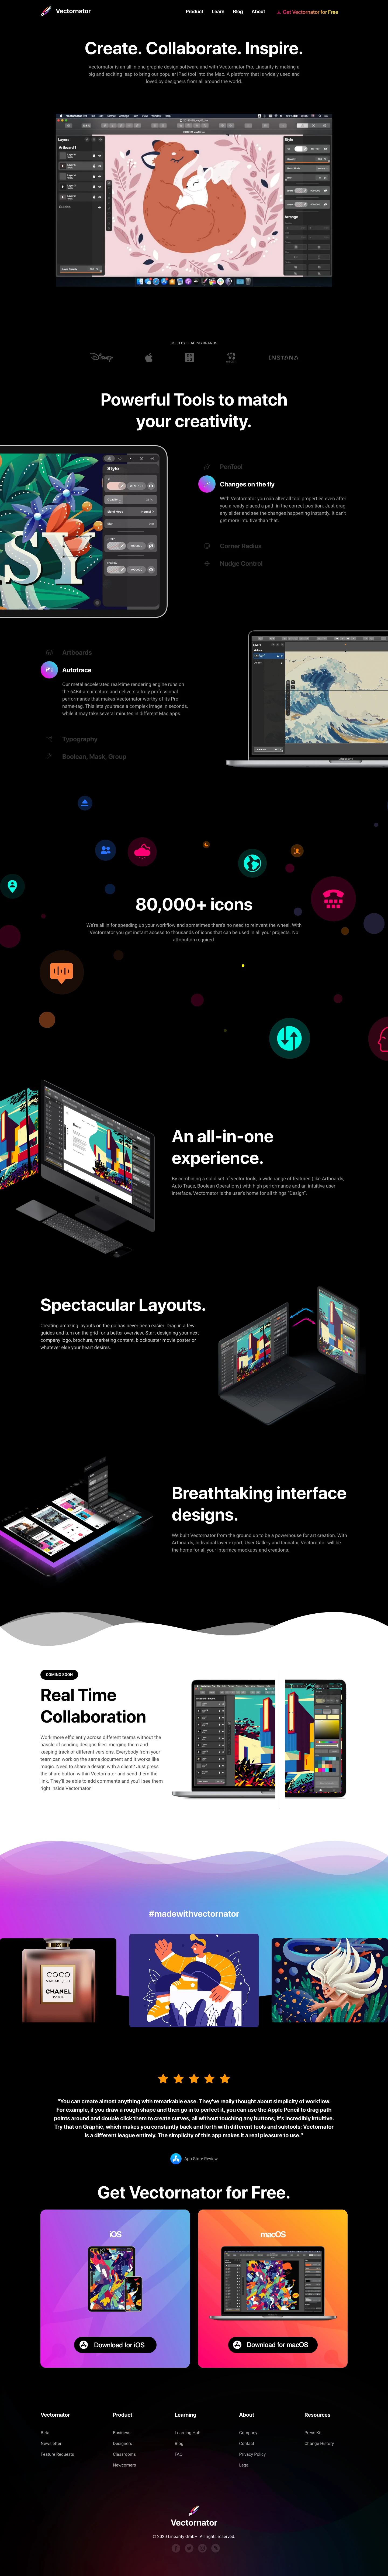 Vectornator Landing Page Example: Vectornator is an all in one graphic design software and with Vectornator Pro, Linearity is making a big and exciting leap to bring our popular iPad tool into the Mac. A platform that is widely used and loved by designers from all around the world.